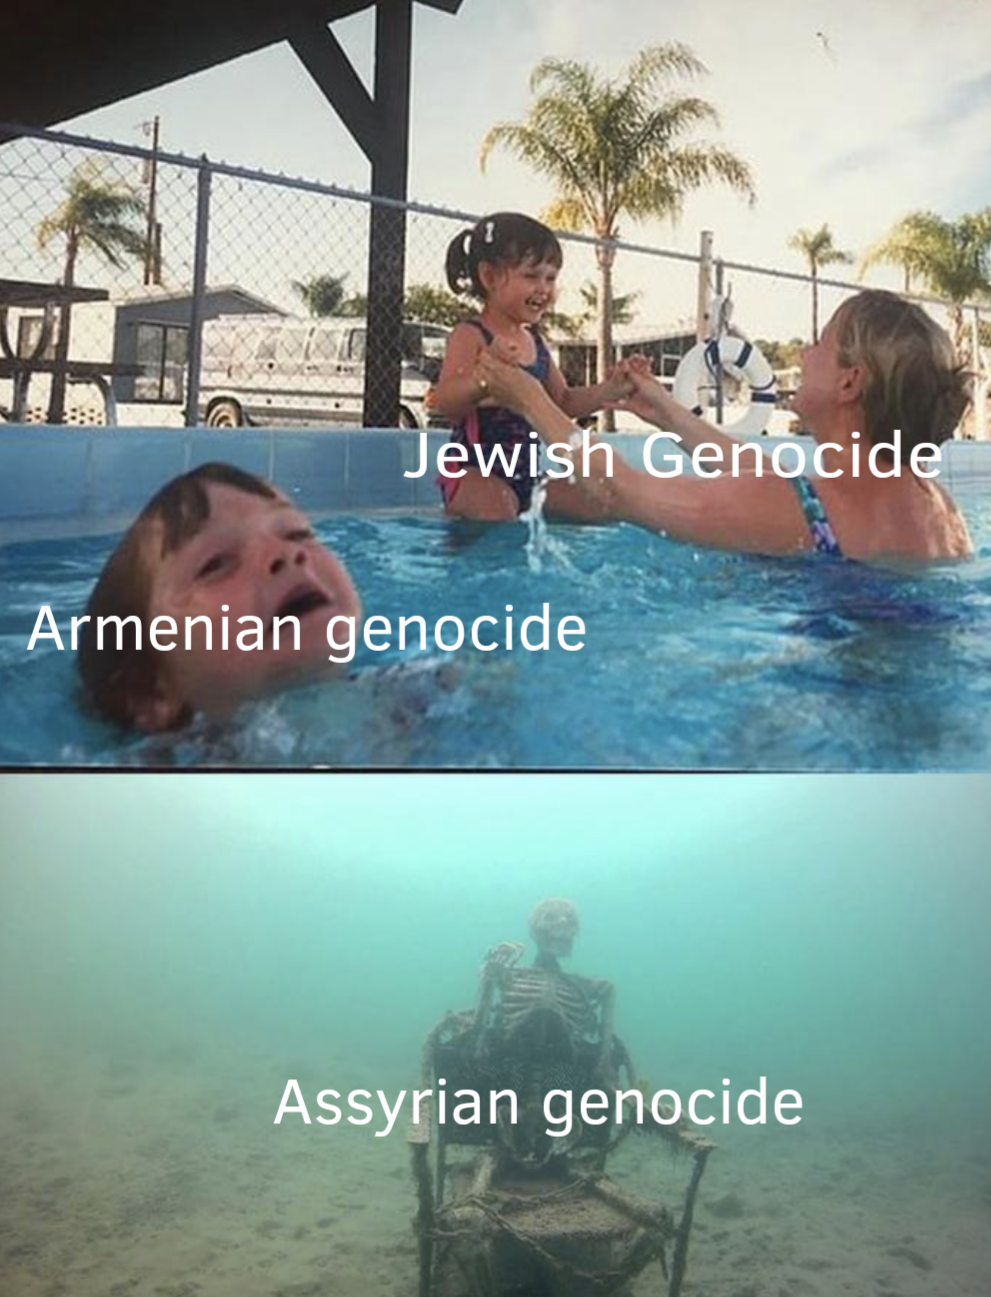 "The Assyrians? Oh no what happened to Syria!?"